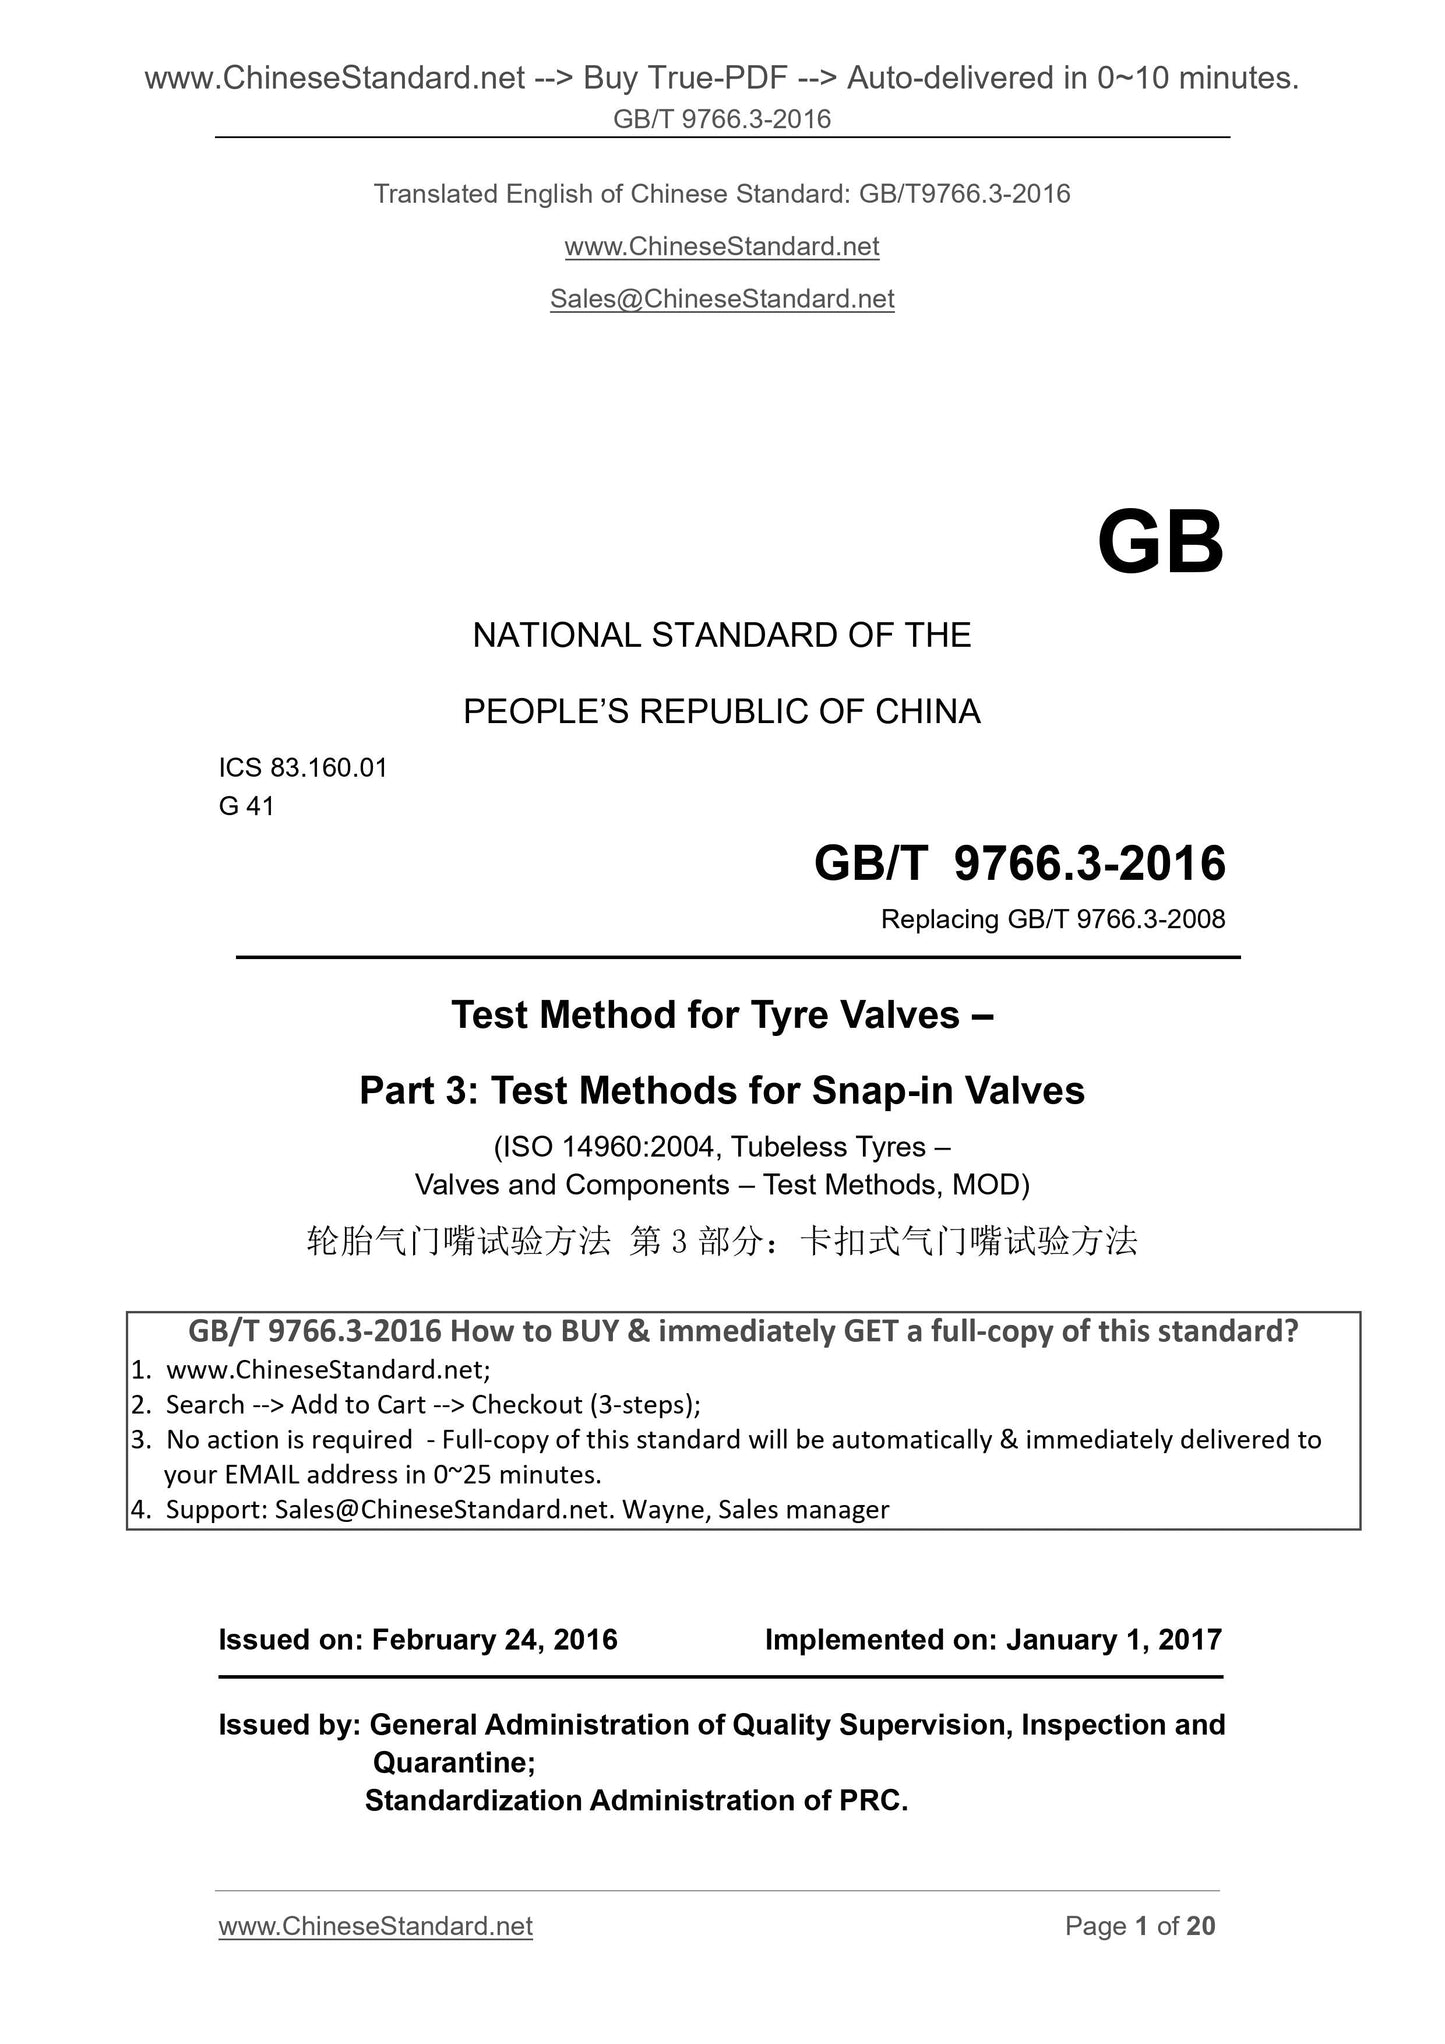 GB/T 9766.3-2016 Page 1